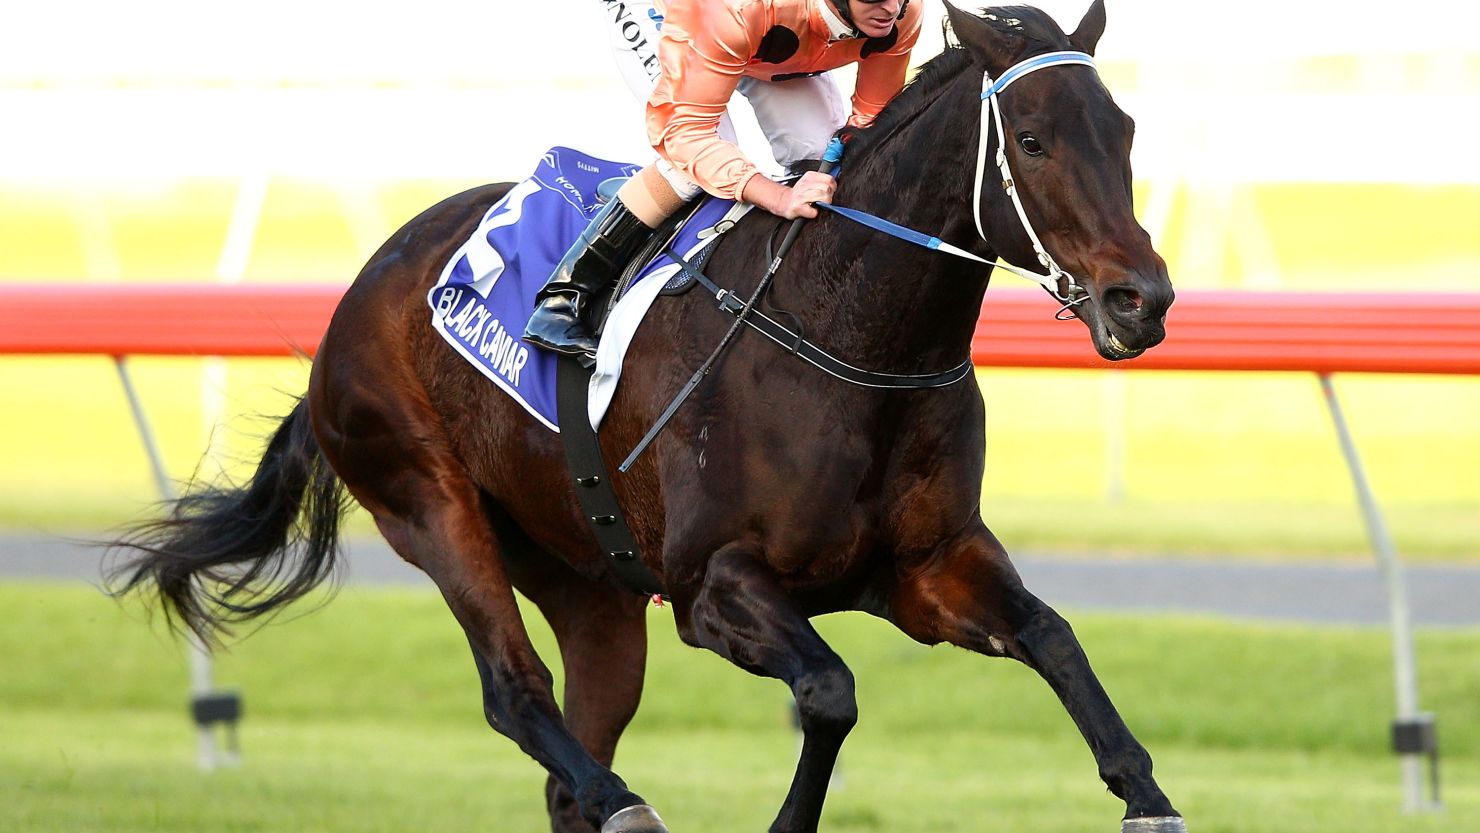 Black Caviar could make her long-awaited return to action early next year after recovering from injury.